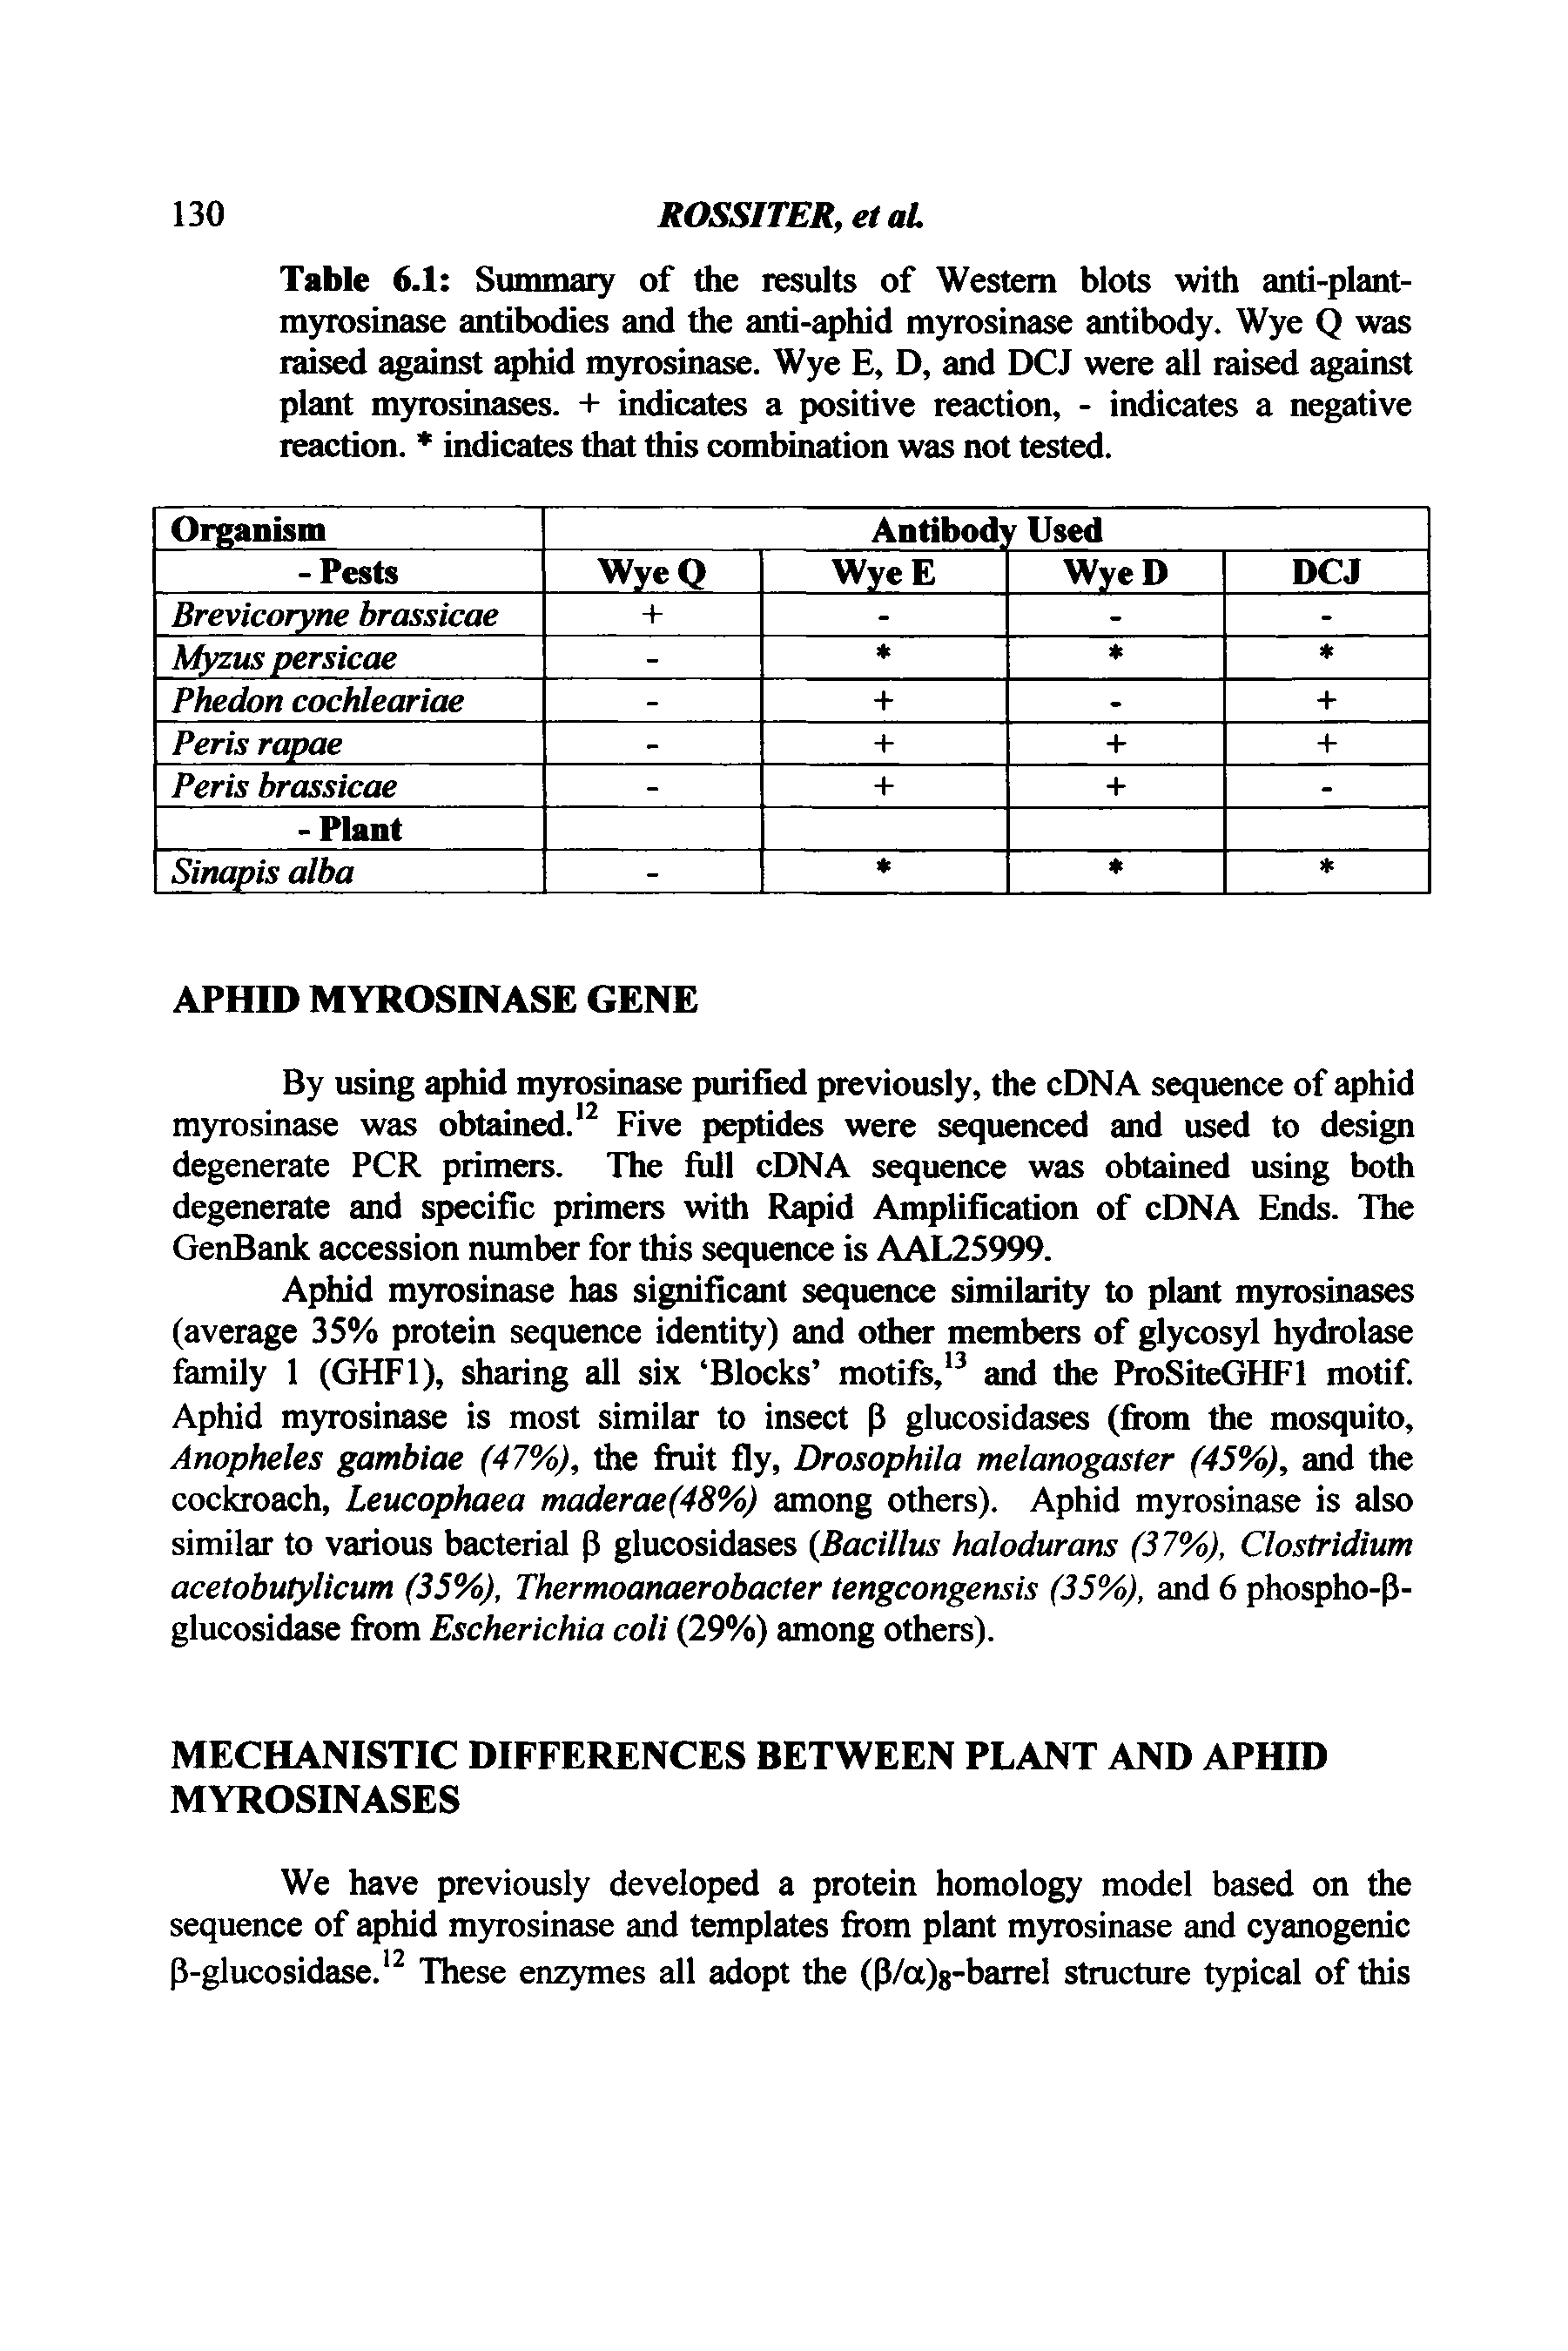 Table 6.1 Summary of the results of Western blots with anti-plant-myrosinase antibodies and the anti-aphid myrosinase antibody. Wye Q was raised against aphid myrosinase. Wye E, D, and DCJ were all raised against plant myrosinases. + indicates a positive reaction, - indicates a negative reaction. indicates that this combination was not tested.